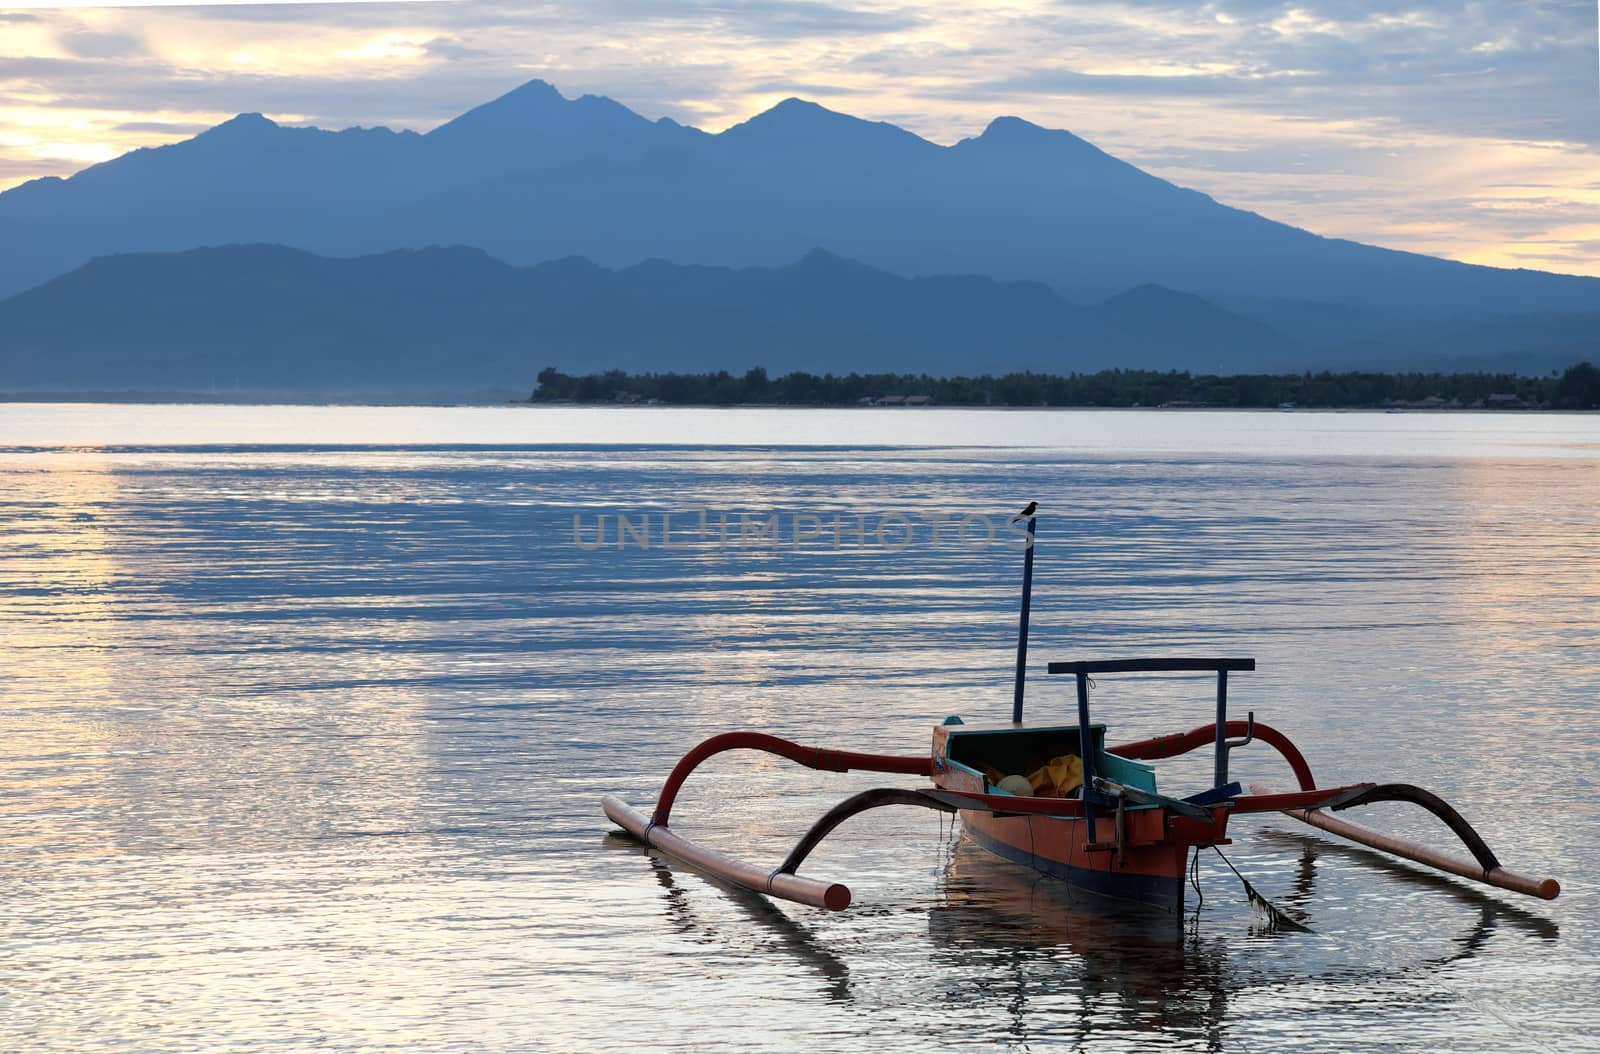 Fisherman boat with lombok volcano Rinjani in the background before the sunrise